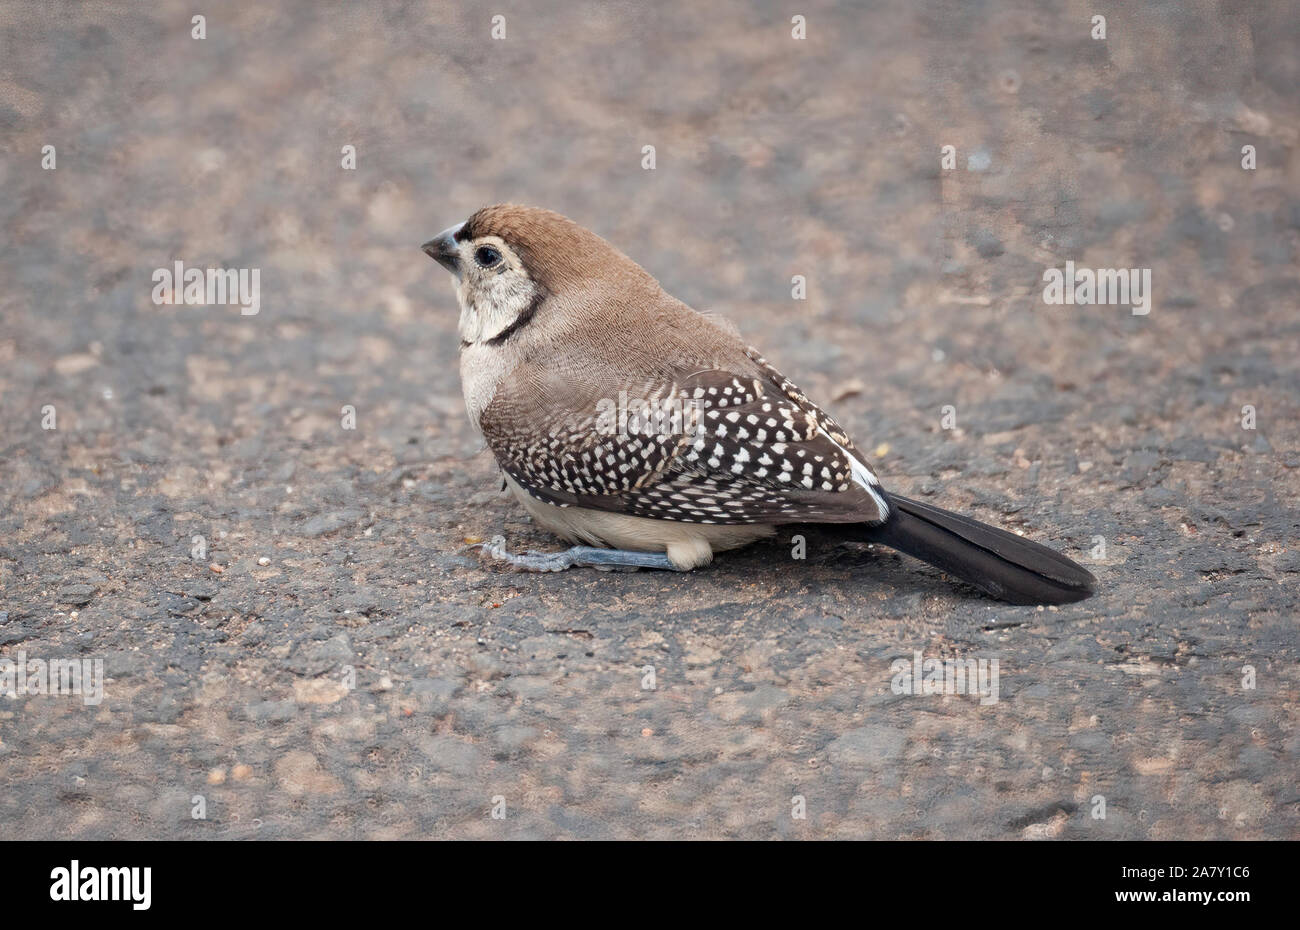 A Double-barred Finched sits stunned after being assaulted by a Brown Honeyeater Stock Photo